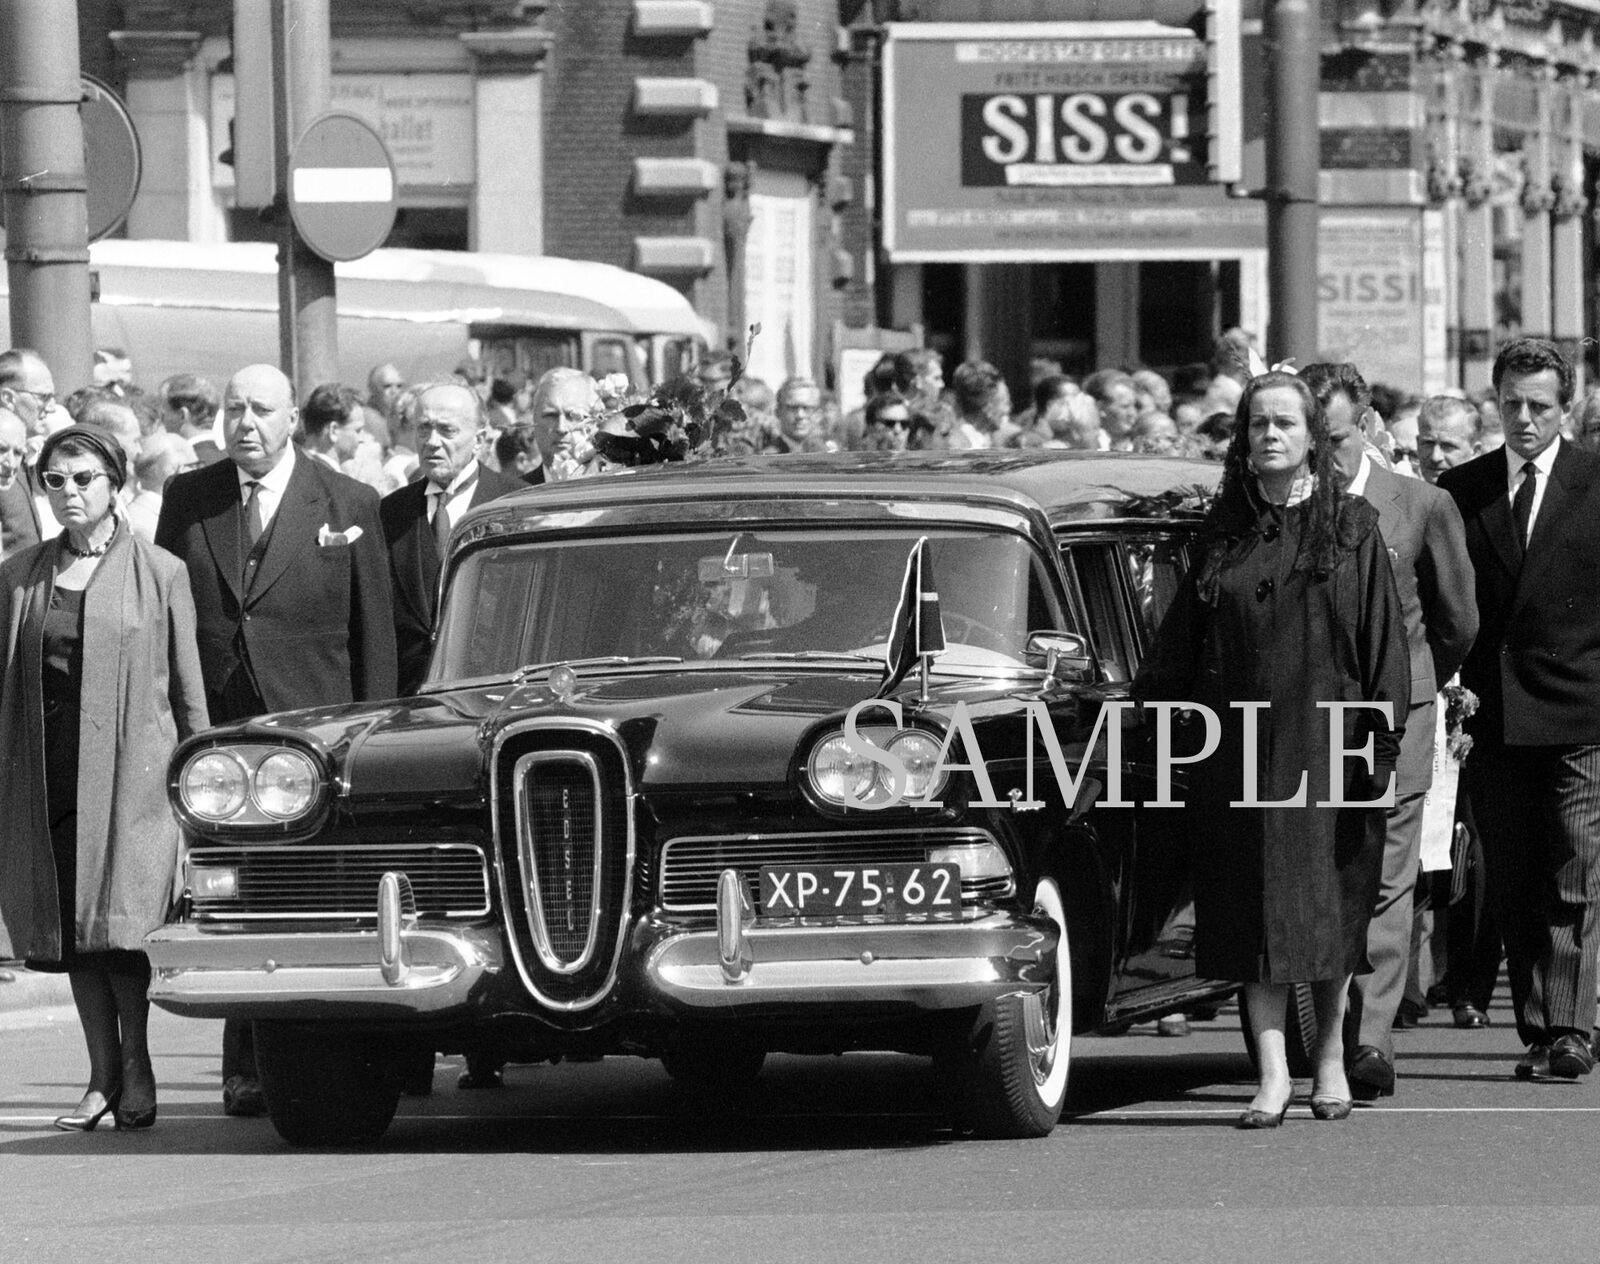 1958 Rare EDSEL PACER HEARSE Amsterdam Funeral PHOTO  (163-C)